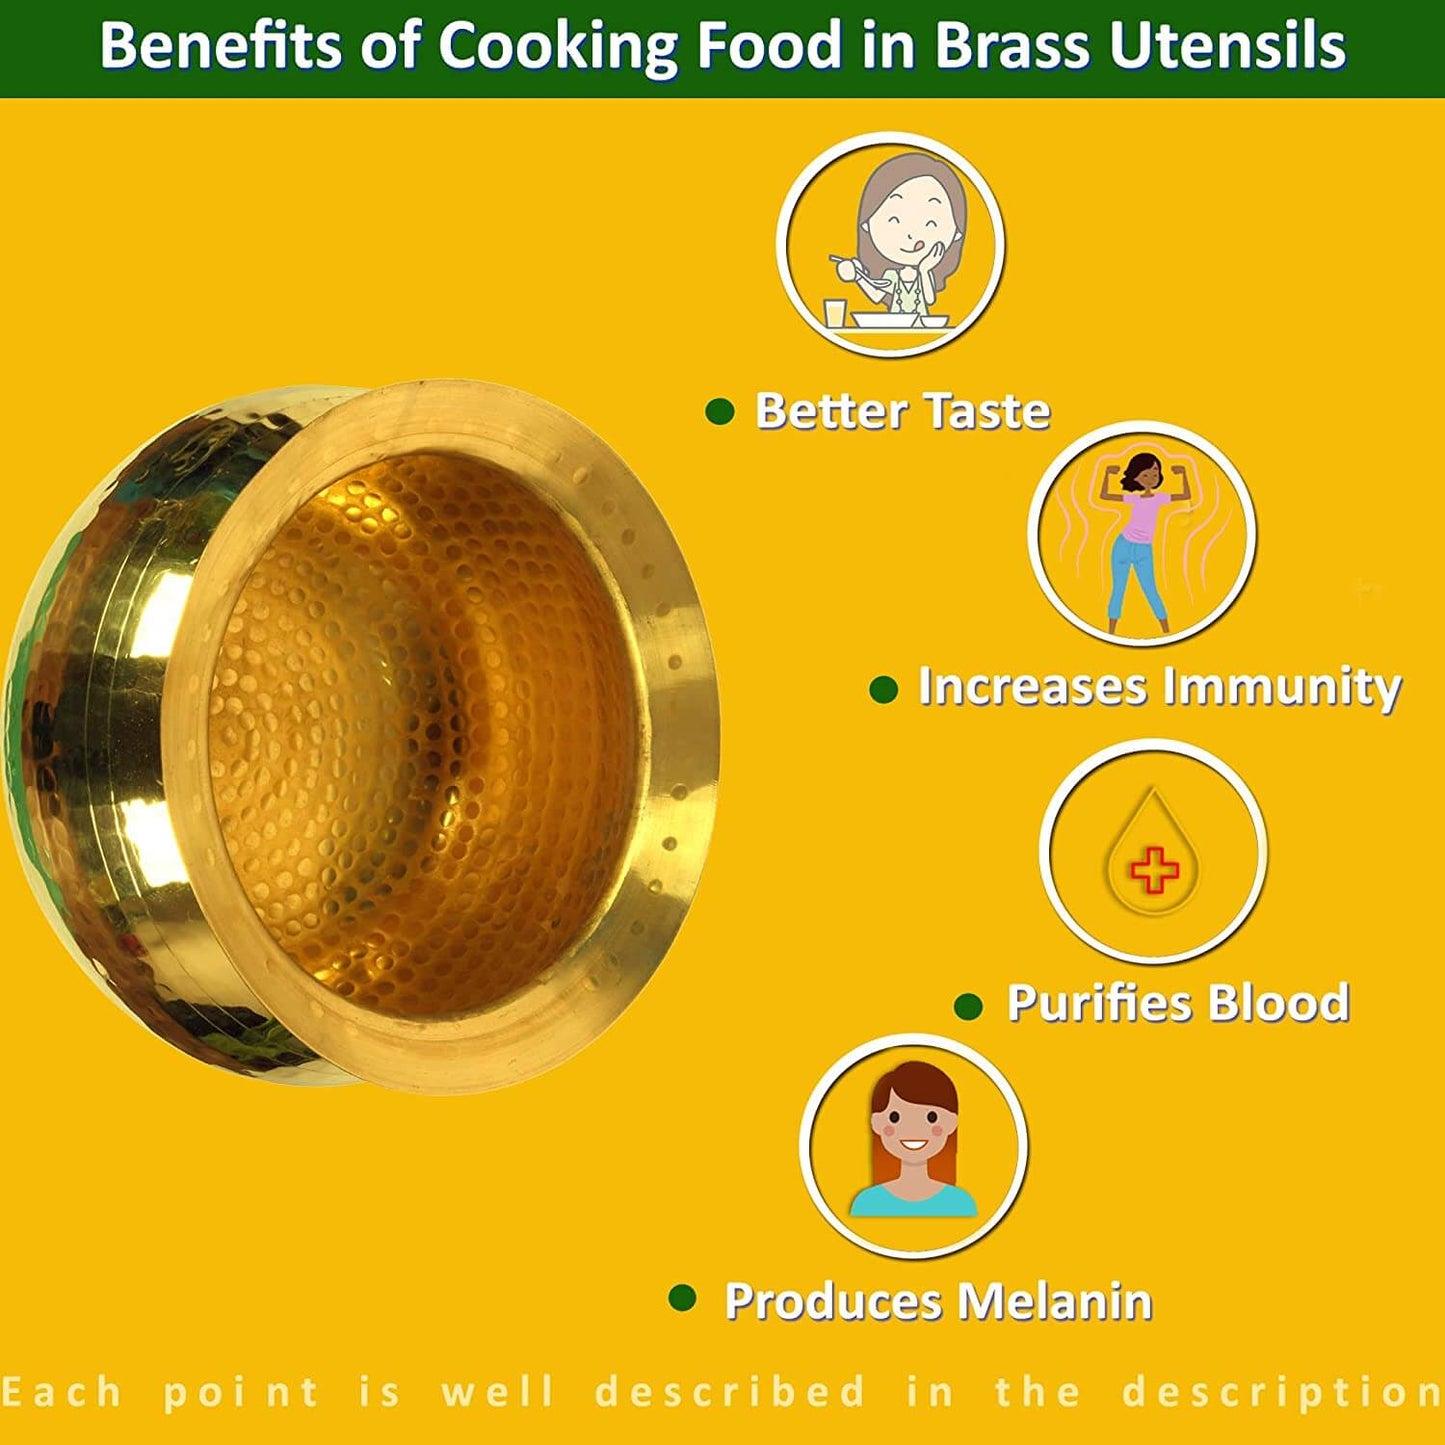 Brass Pot Handi for Cooking Food (Water Capacity 2 Liter) for Cooking Food, Boiling Milk, Pongal, Biryani Mangal Fashions | Indian Home Decor and Craft